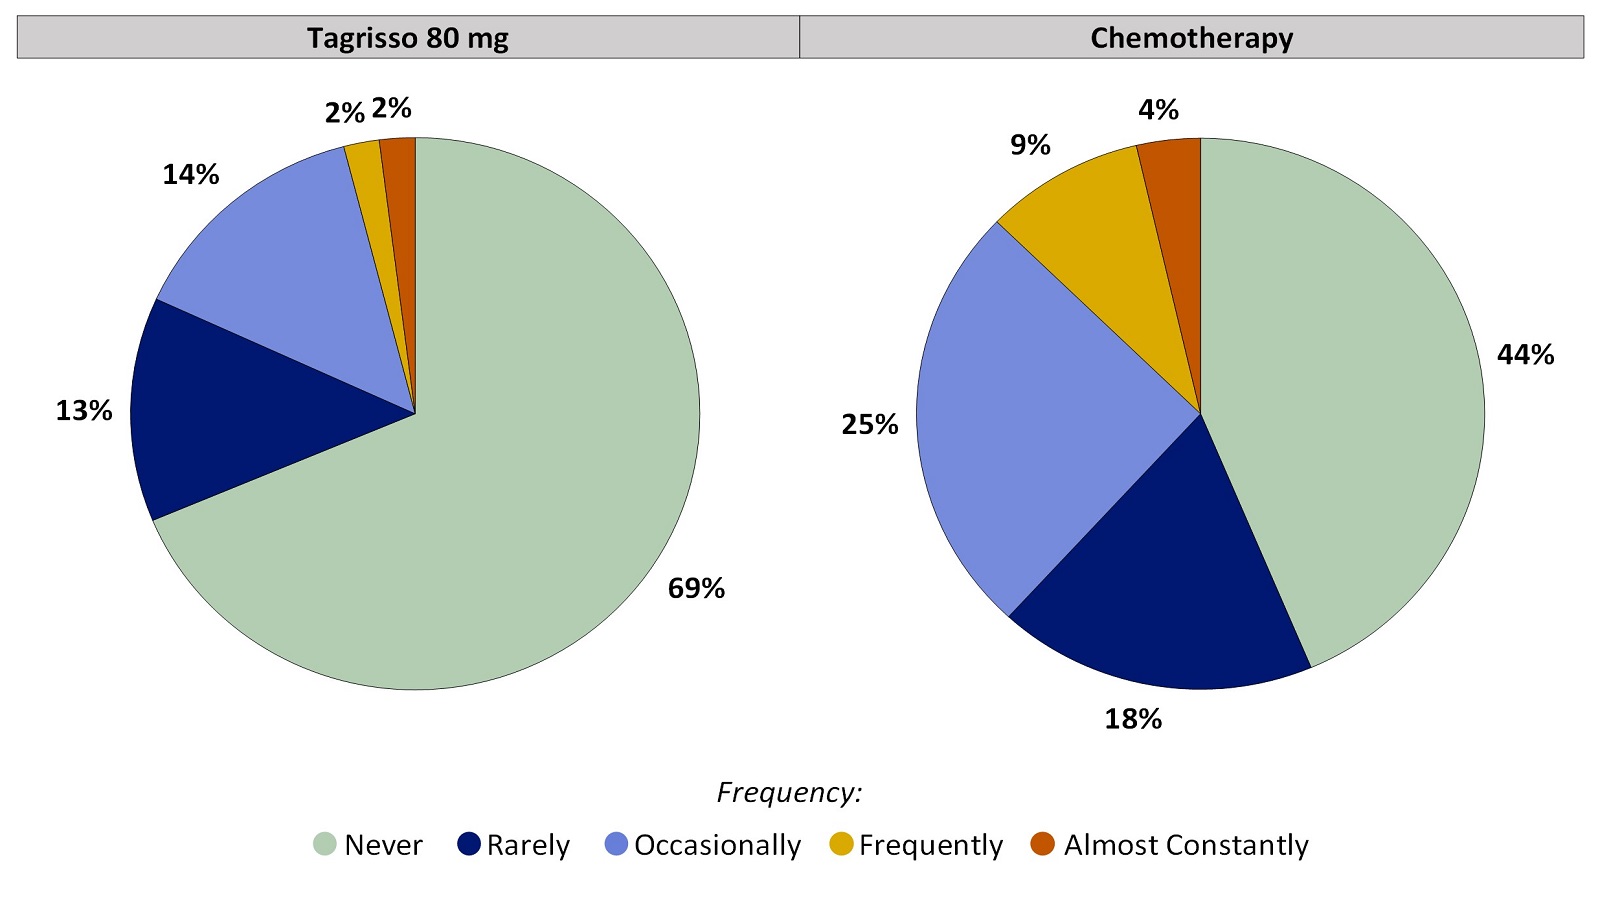 Two pie charts, one for Tagrisso and the other for chemotherapy, summarizing the percentage of patients by worst reported vomiting during the first 24 weeks of the clinical trial. In the Tagrisso arm, Never (69%), Rarely (13%), Occasionally (14%), Frequently (2%) and Almost constantly (2%). In the chemotherapy arm, Never (44%), Rarely (18%), Occasionally (25%), Frequently (9%) and Almost constantly (4%).